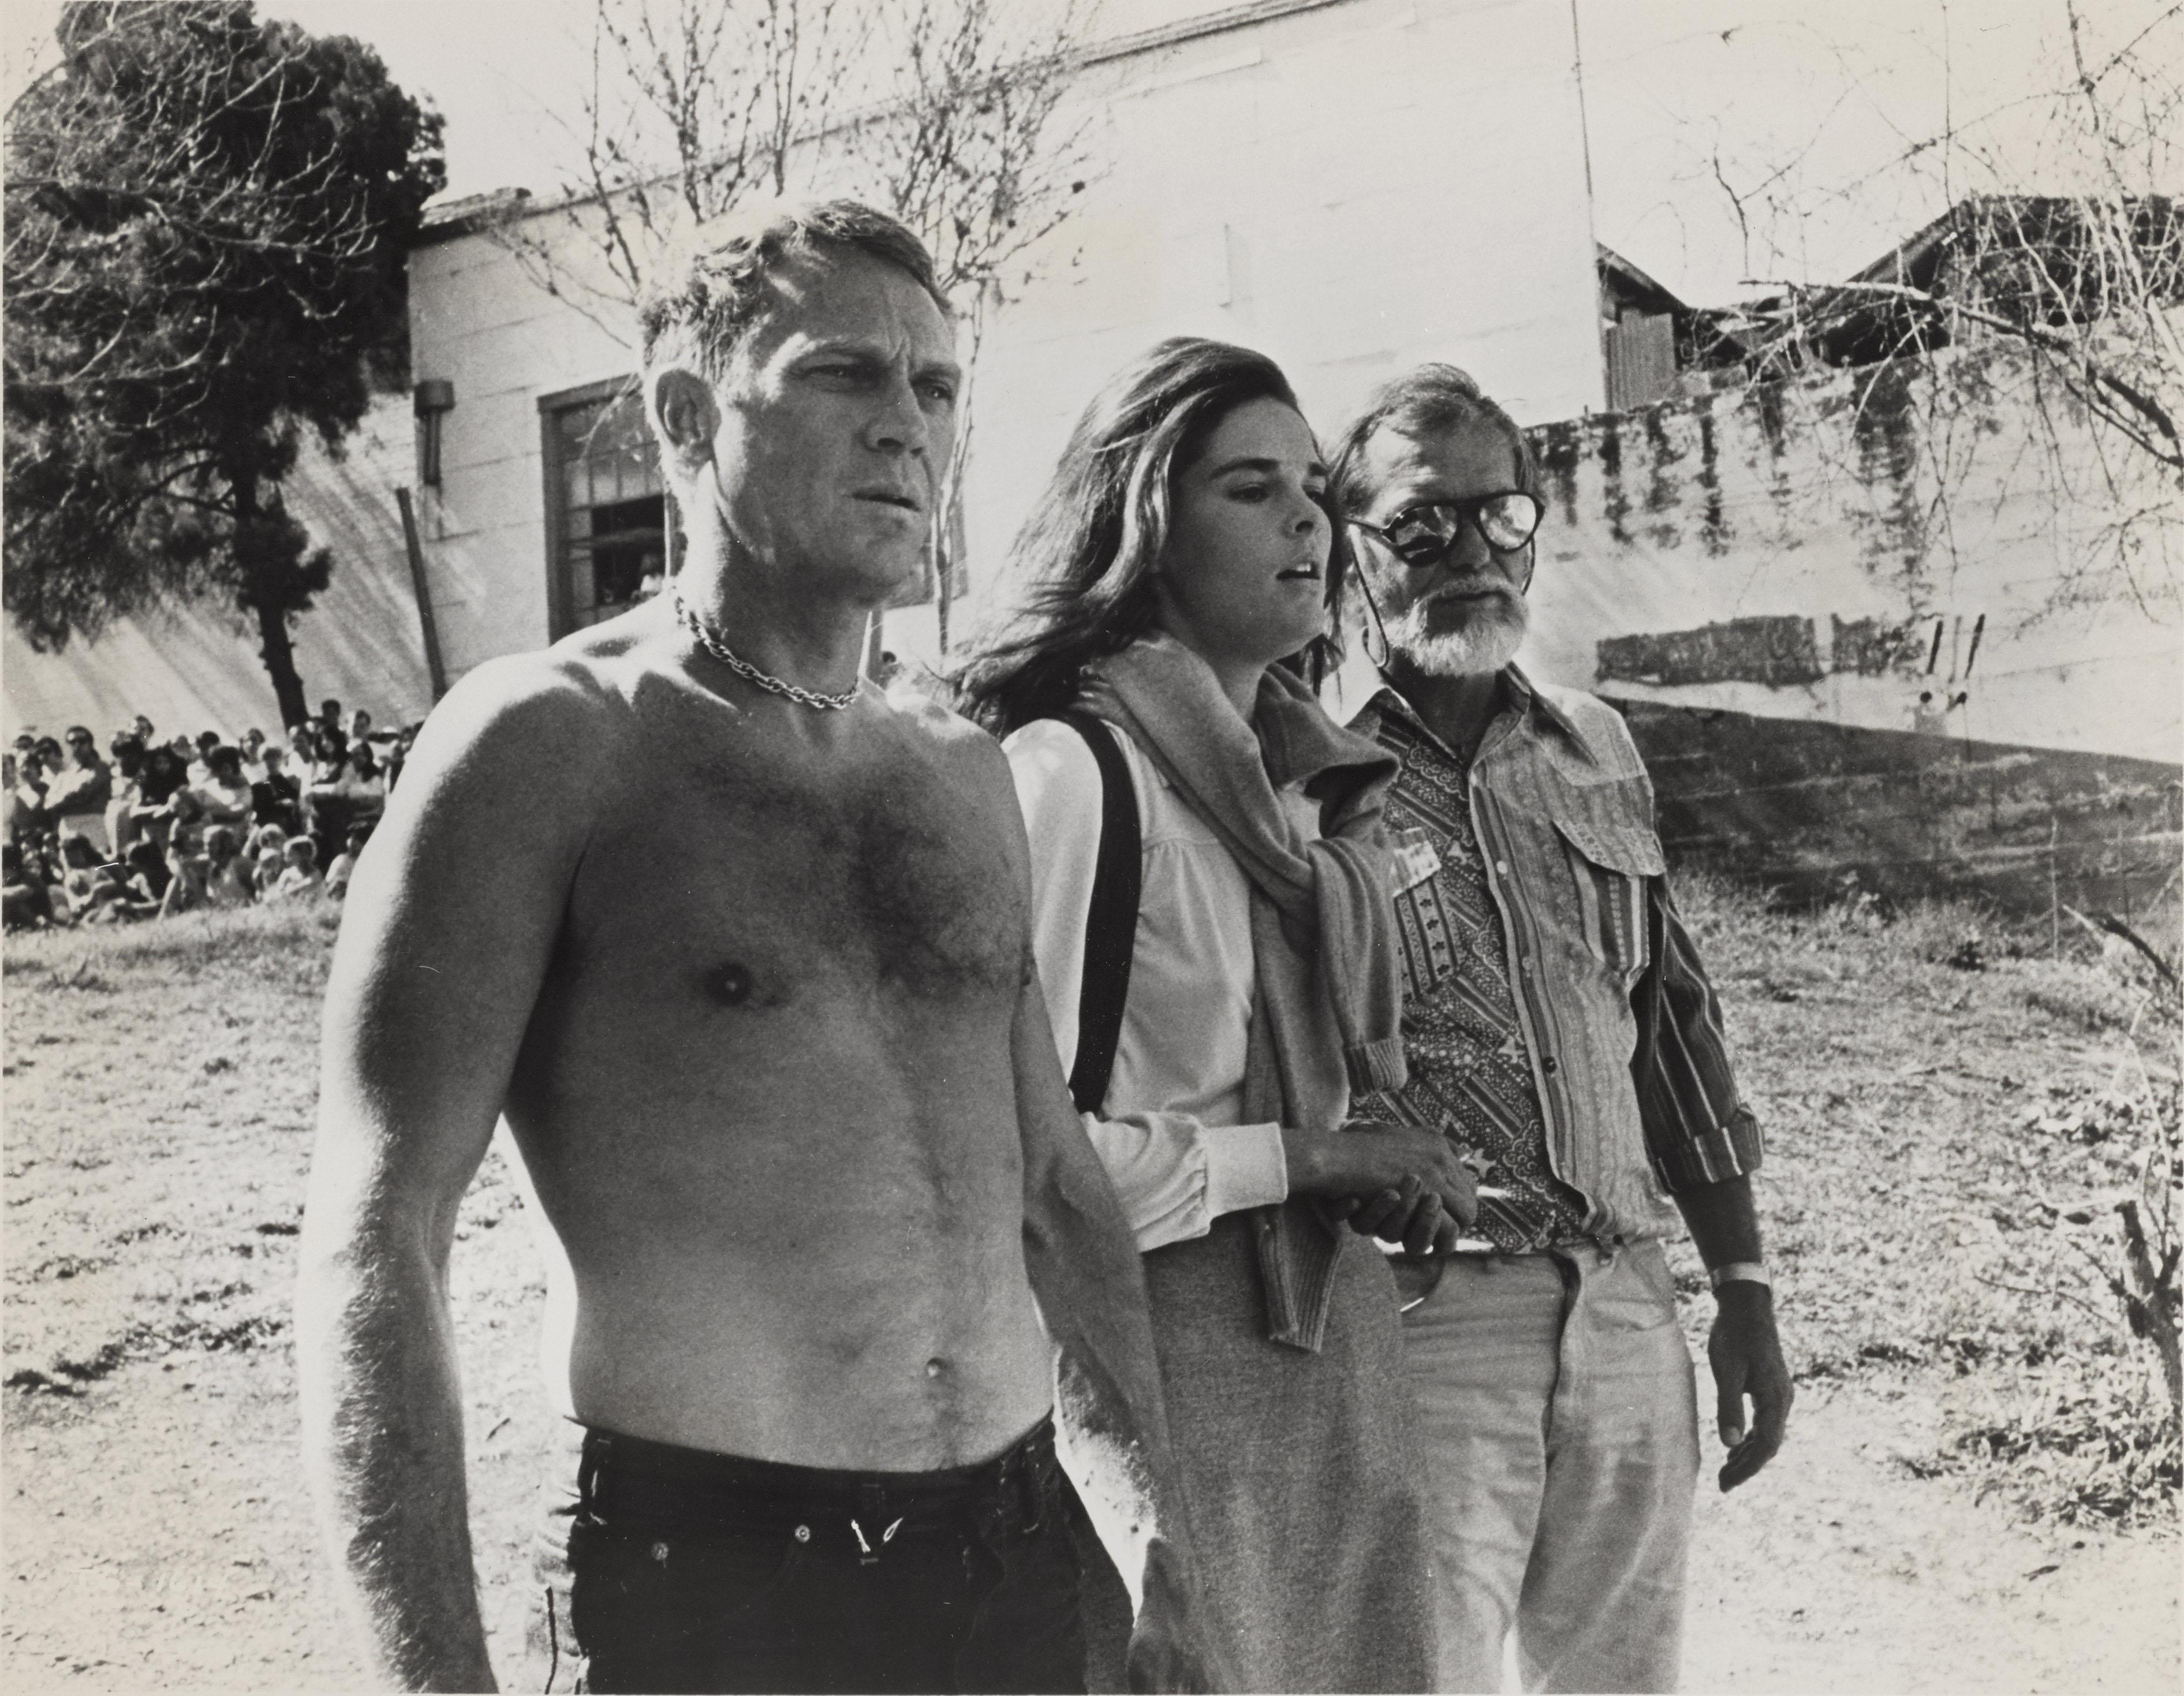 Original photographic production still, from the film The Getaway 1972,
This still would have been shoot off set during the making of the film and shows Steve McQueen, Ali MacGraw on set with Sam Peckinpah the director.
There is a perspex window on